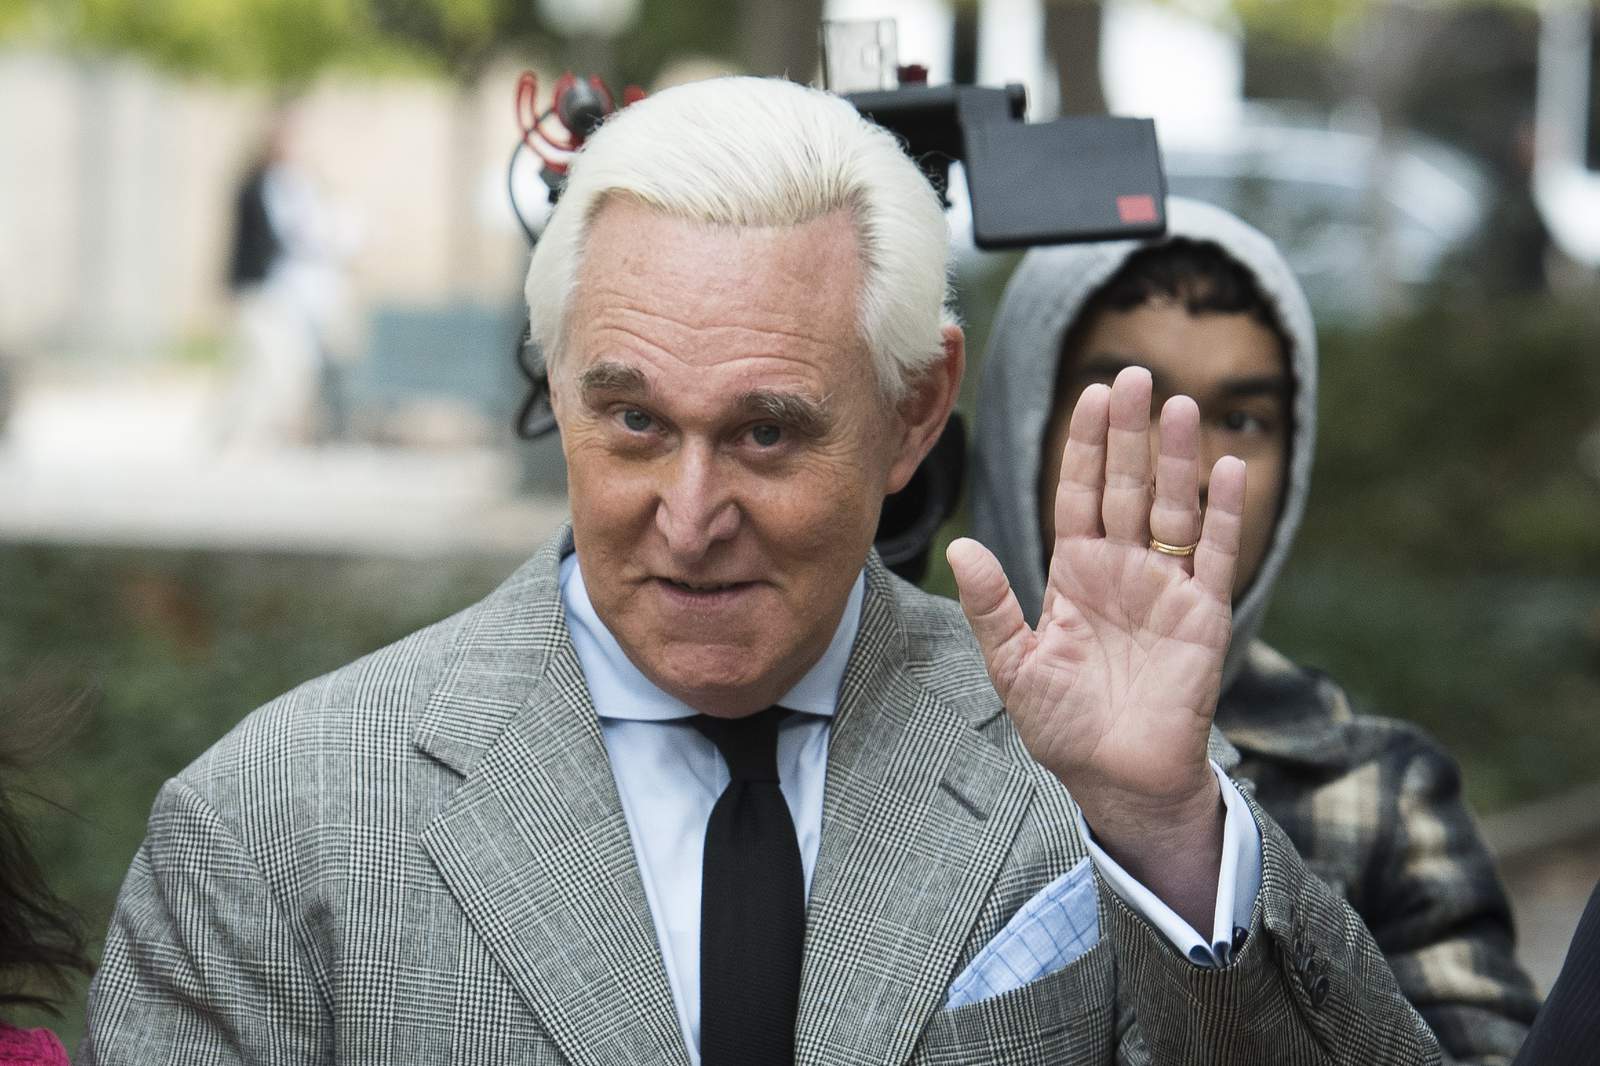 Trump ally Roger Stone sentenced to 40 months on convictions of lying to Congress, witness tampering